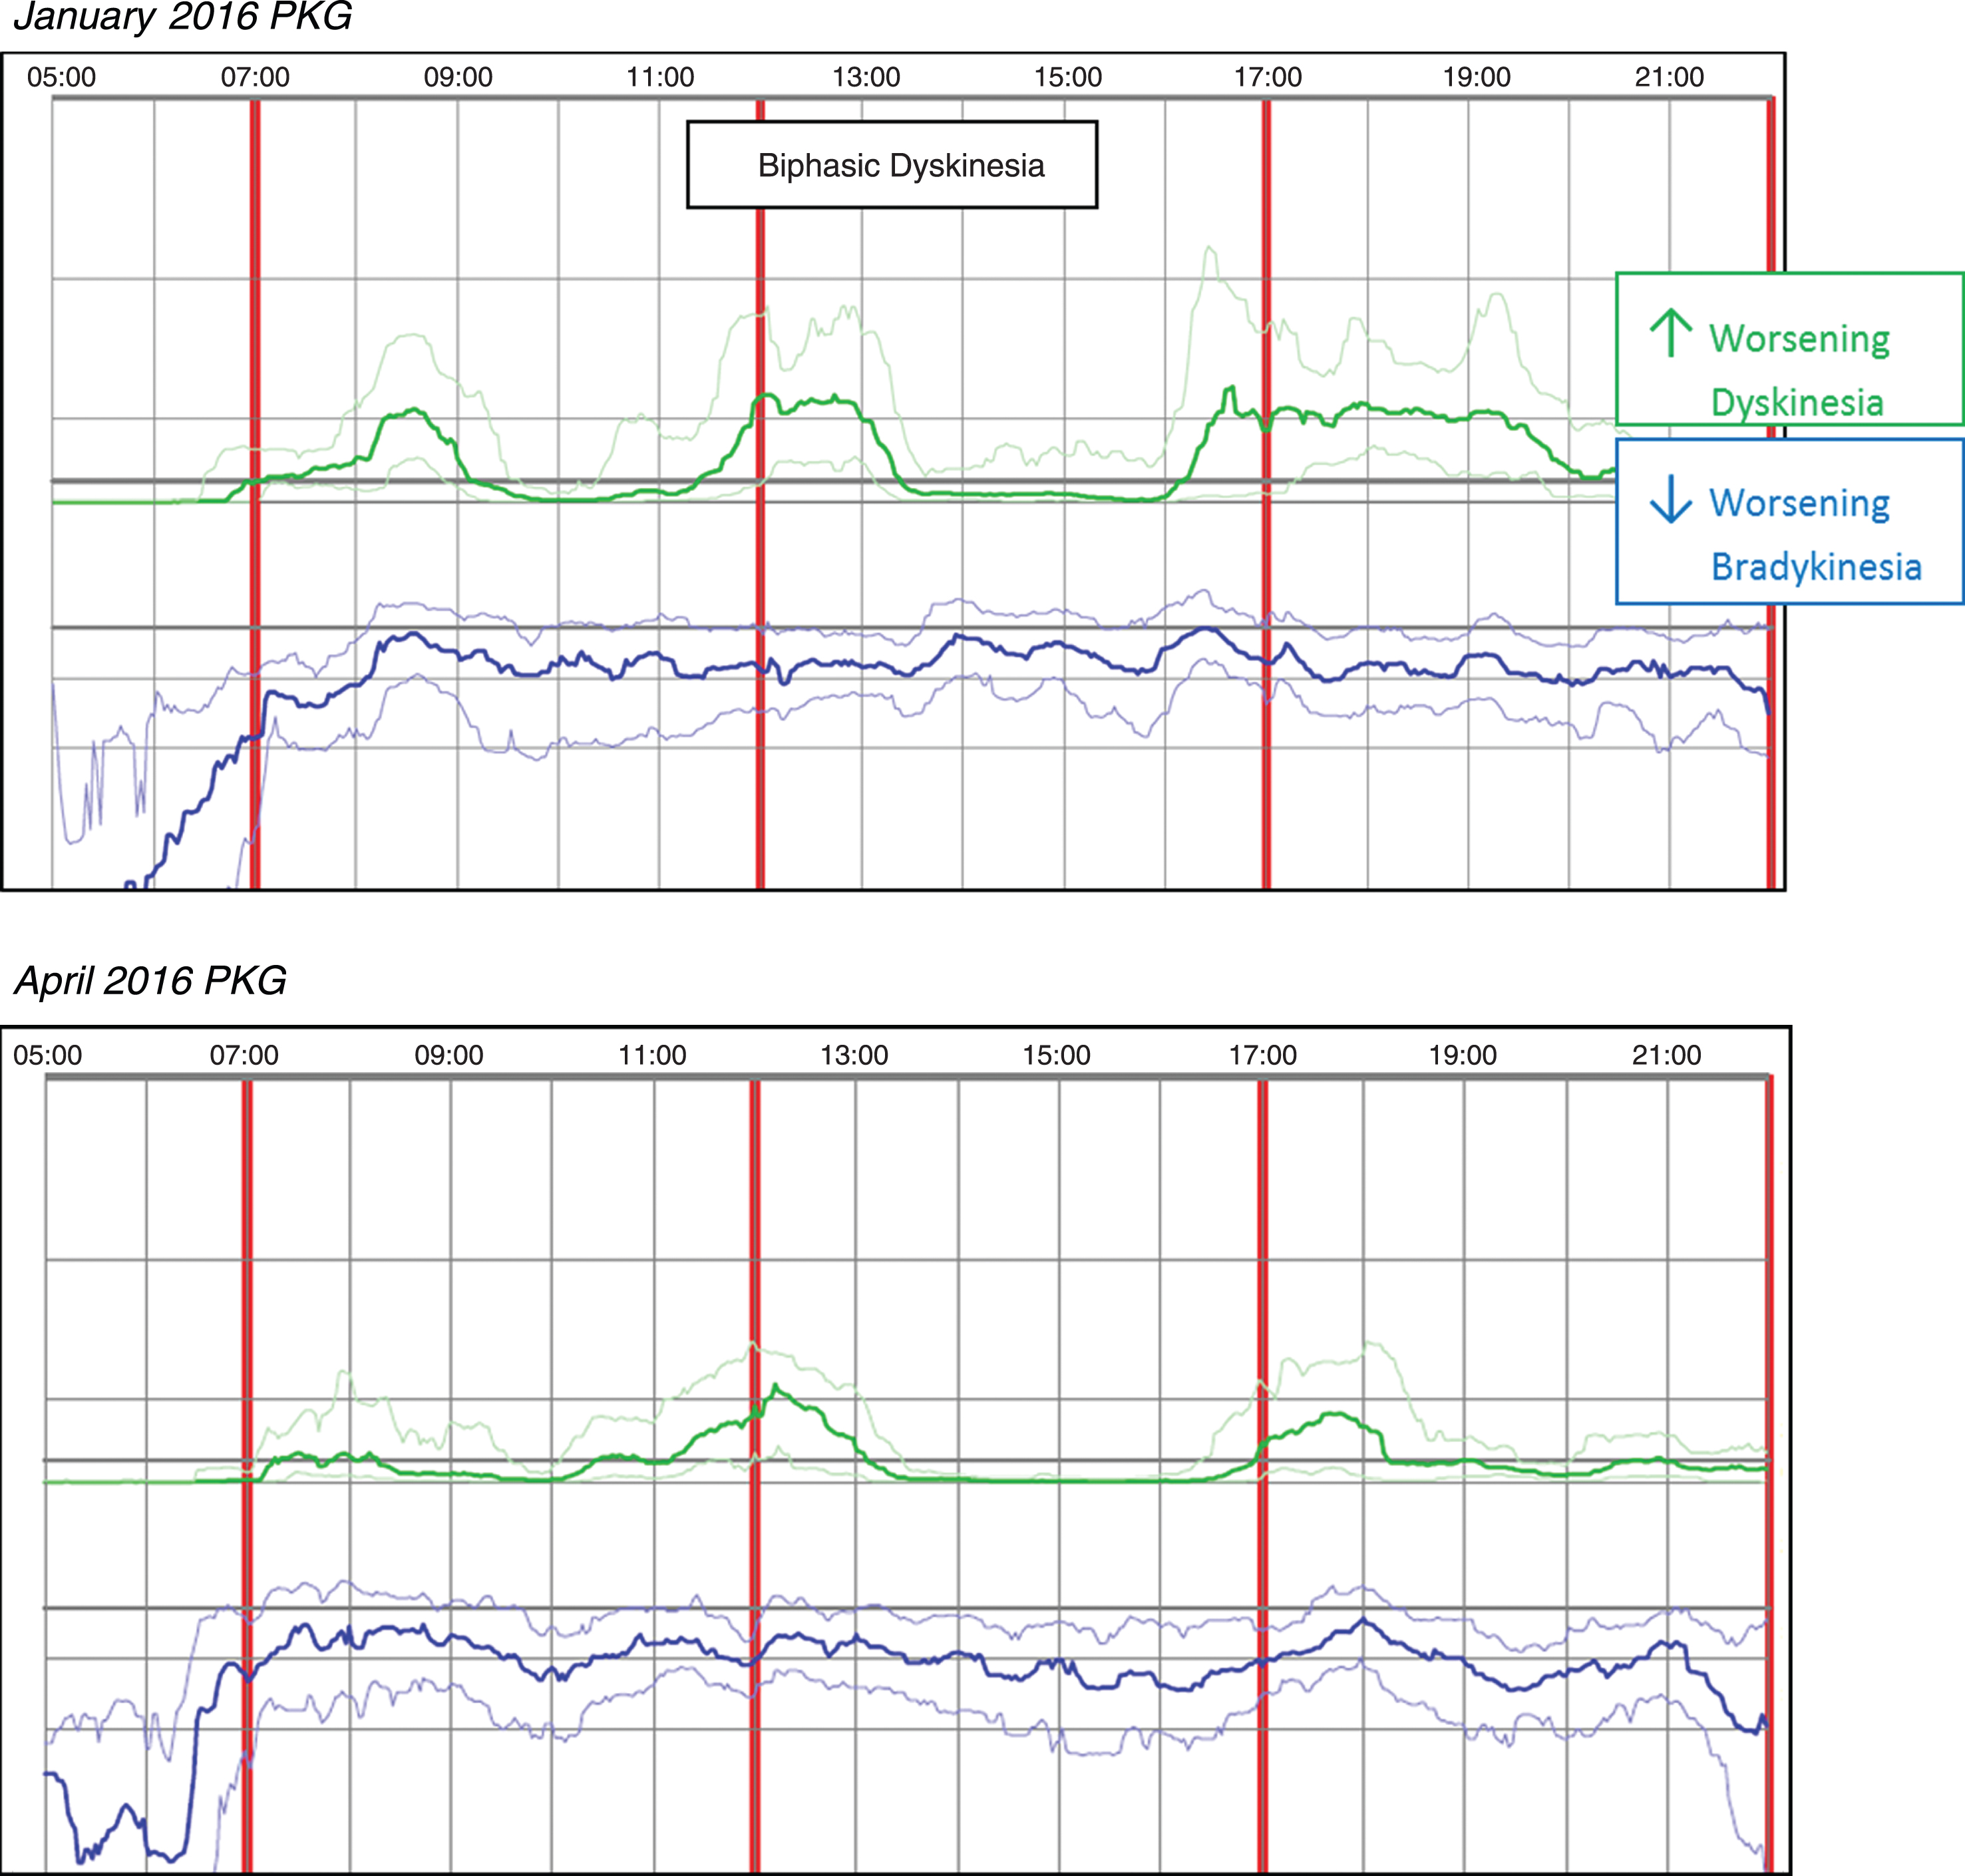 Patient No 18 January 2016 and April 2016 PKG. PKG Summary Plot depicts data from recording day aligned to the time of day. It shows when reminders were given (vertical red lines), the median DKS (heavy green line) and median BKS (heavy blue line) and their corresponding 25th and 75th percentiles plotted against time of day.